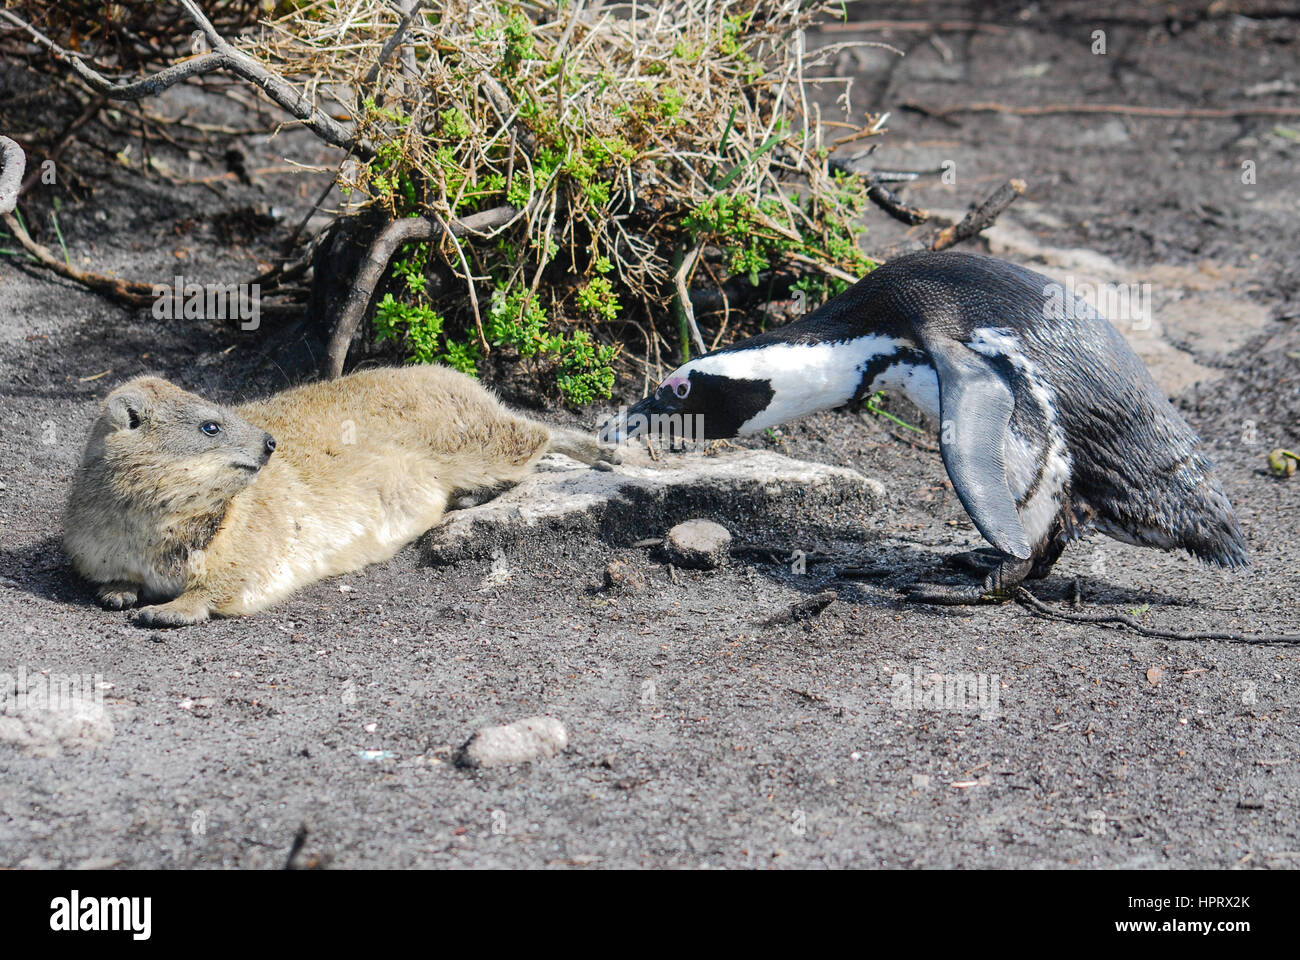 A South African penguin confronting a dassie (rock hyrax) in False Bay, South Africa Stock Photo